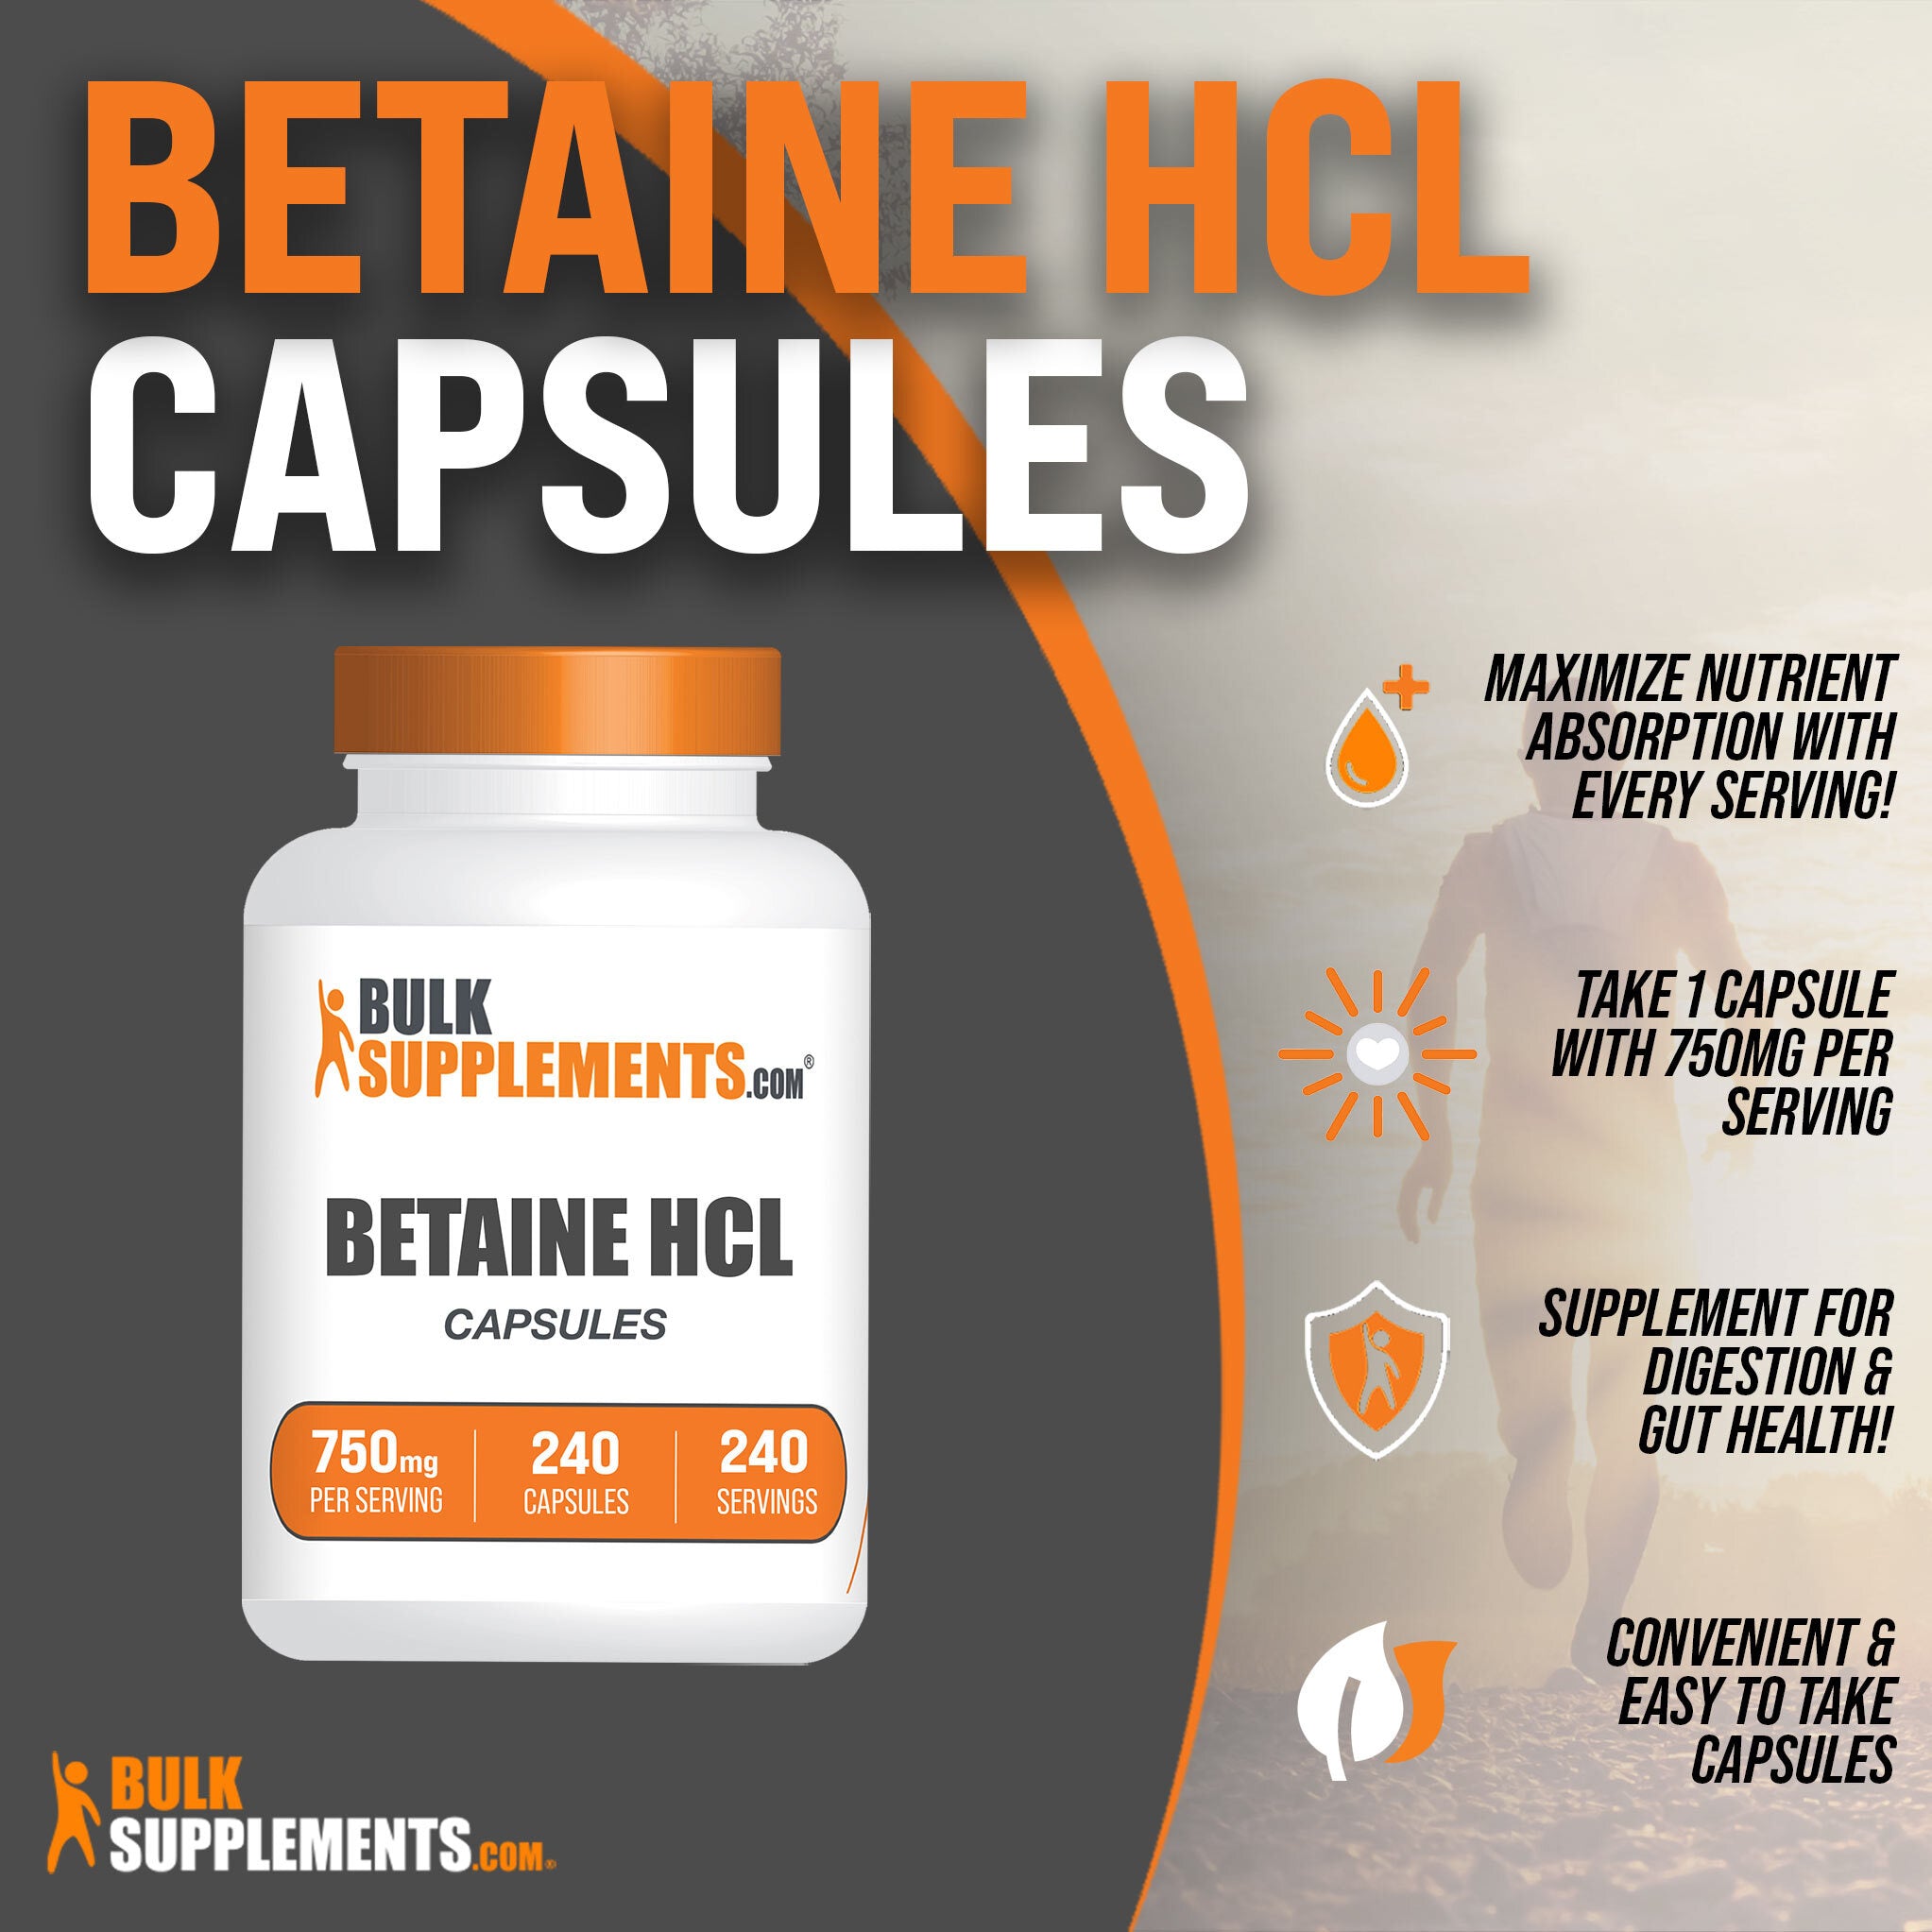 Betaine HCl Capsules